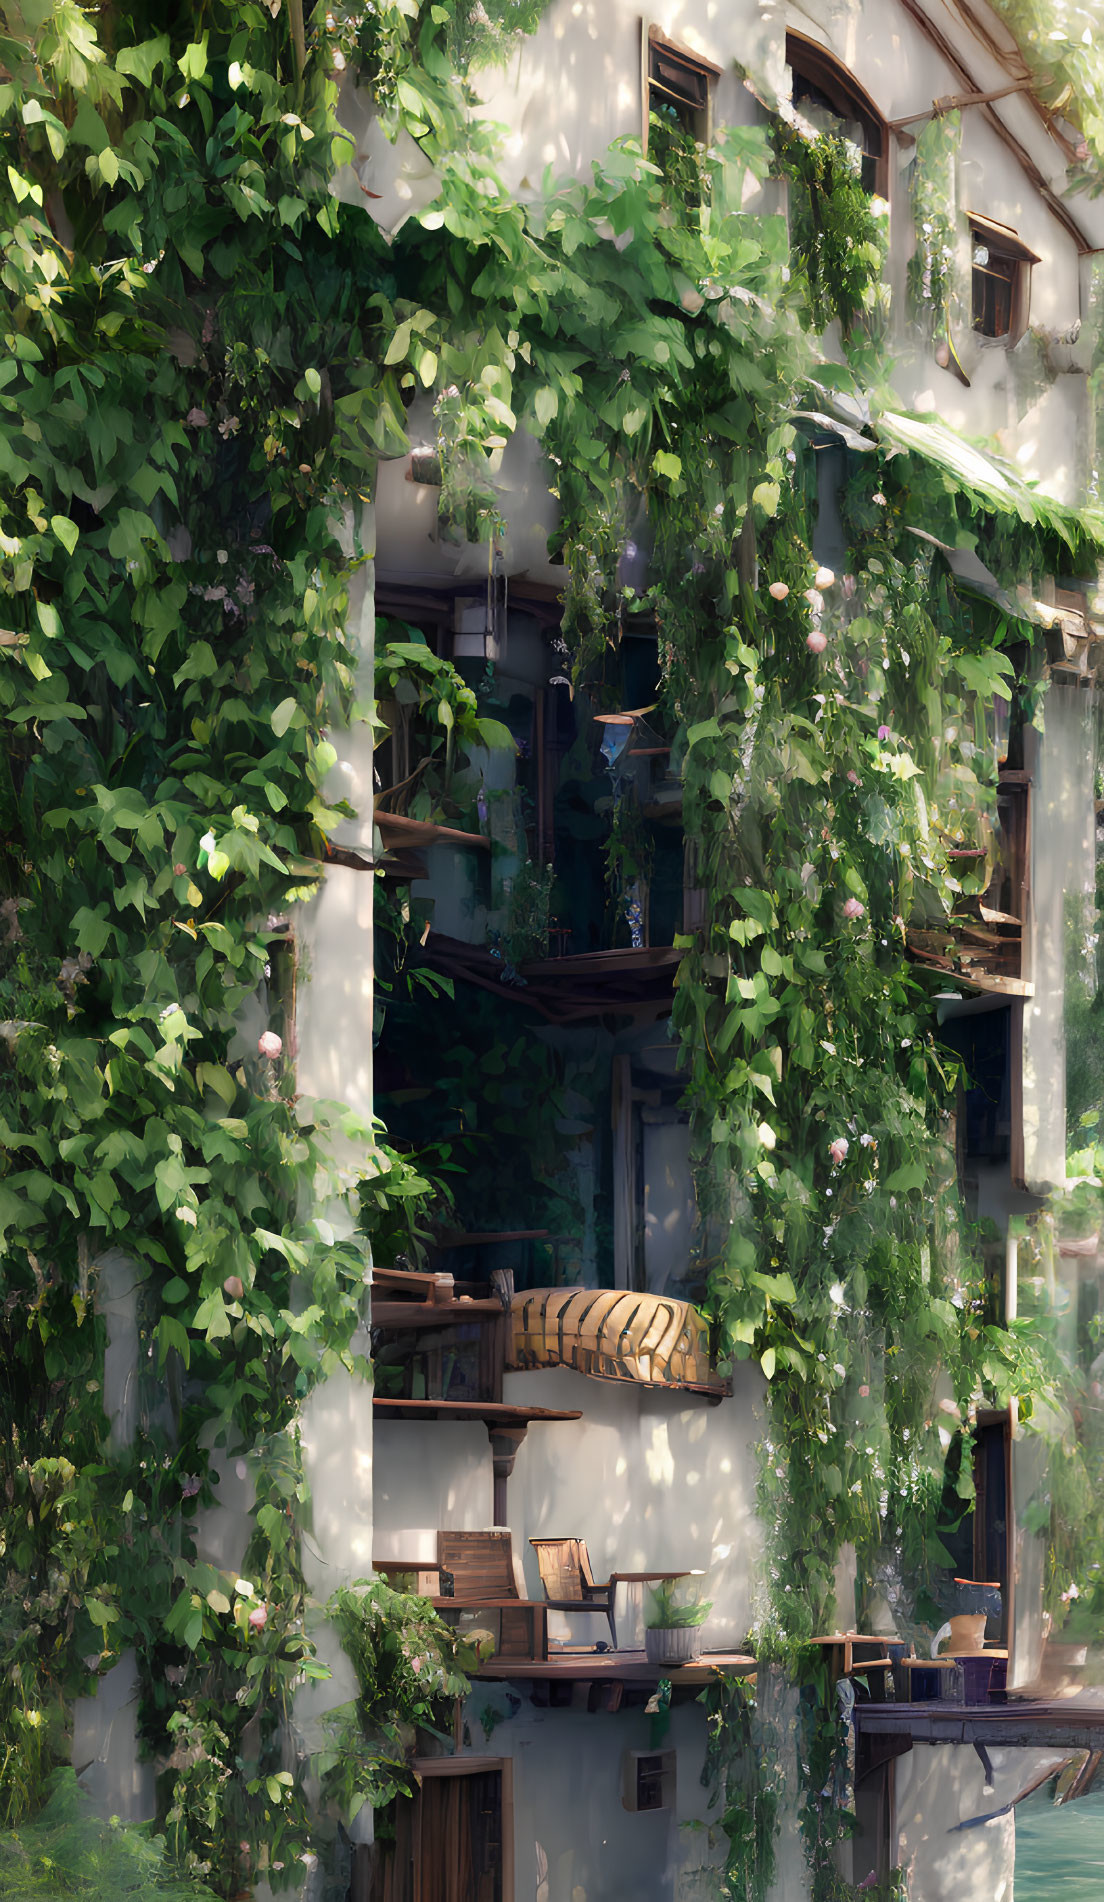 Overgrown building with lush green vines and wooden balconies